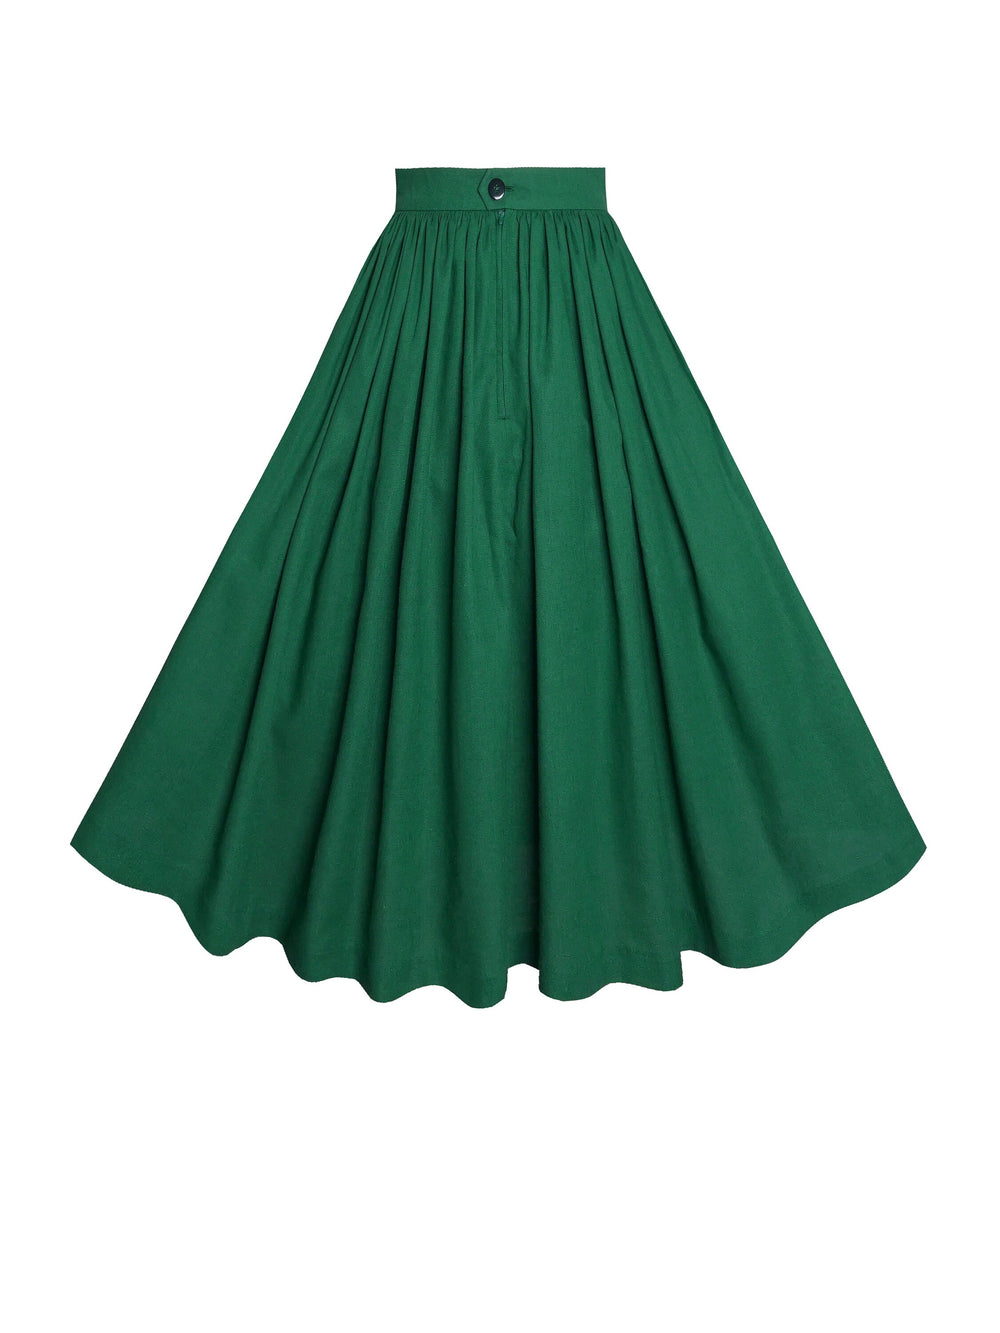 RTS - Size M - Lola Skirt in Forest Green Linen